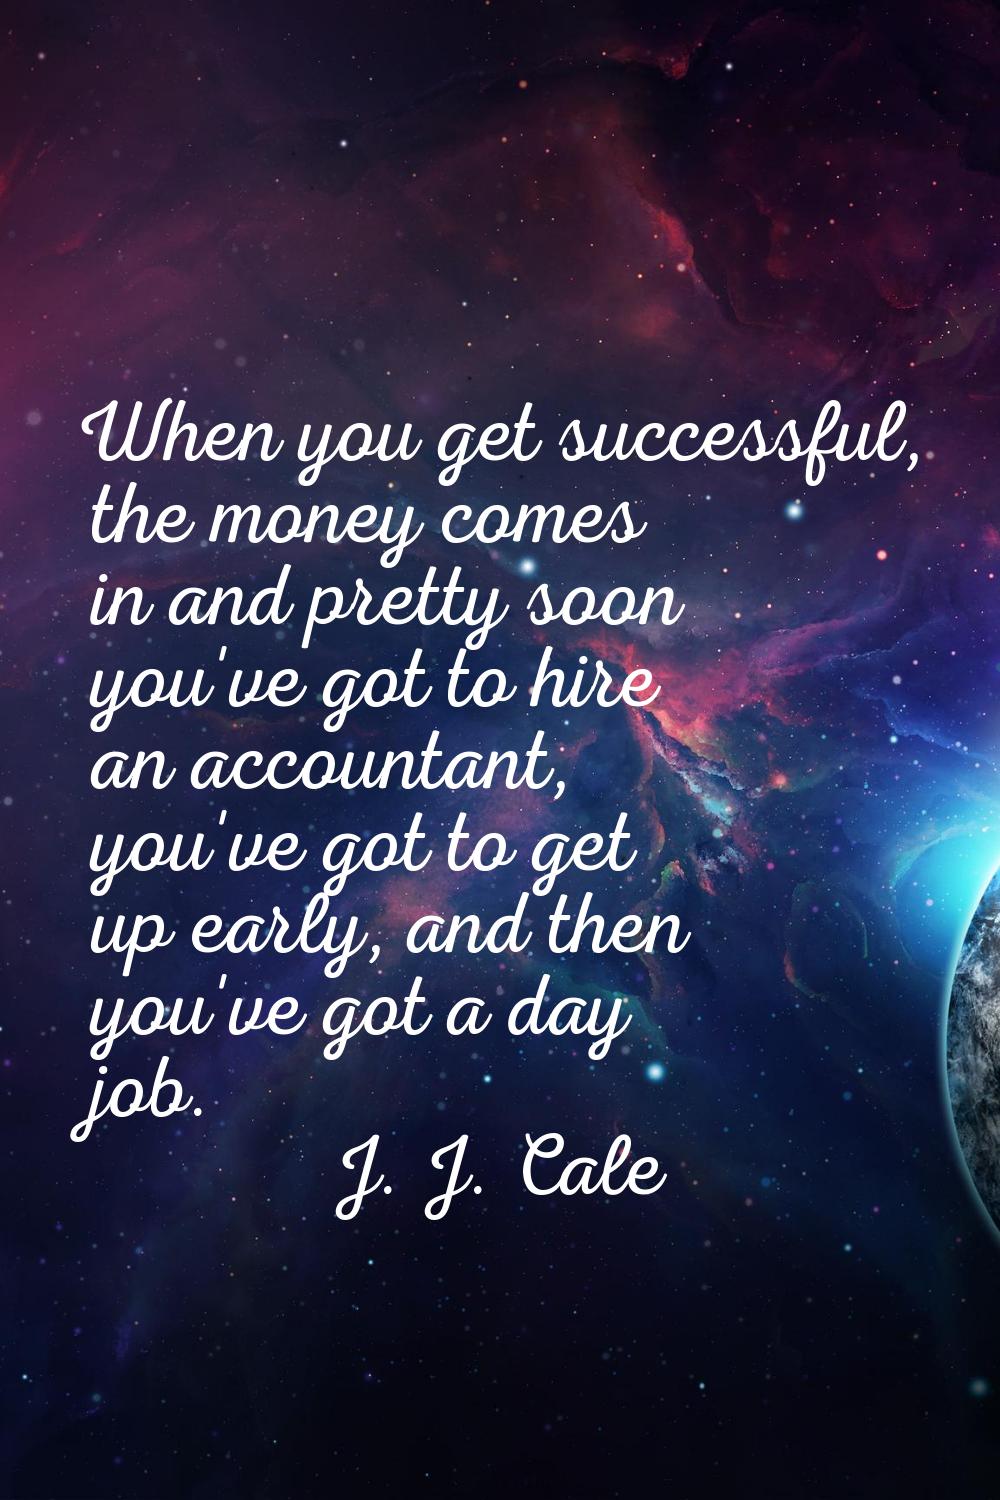 When you get successful, the money comes in and pretty soon you've got to hire an accountant, you'v